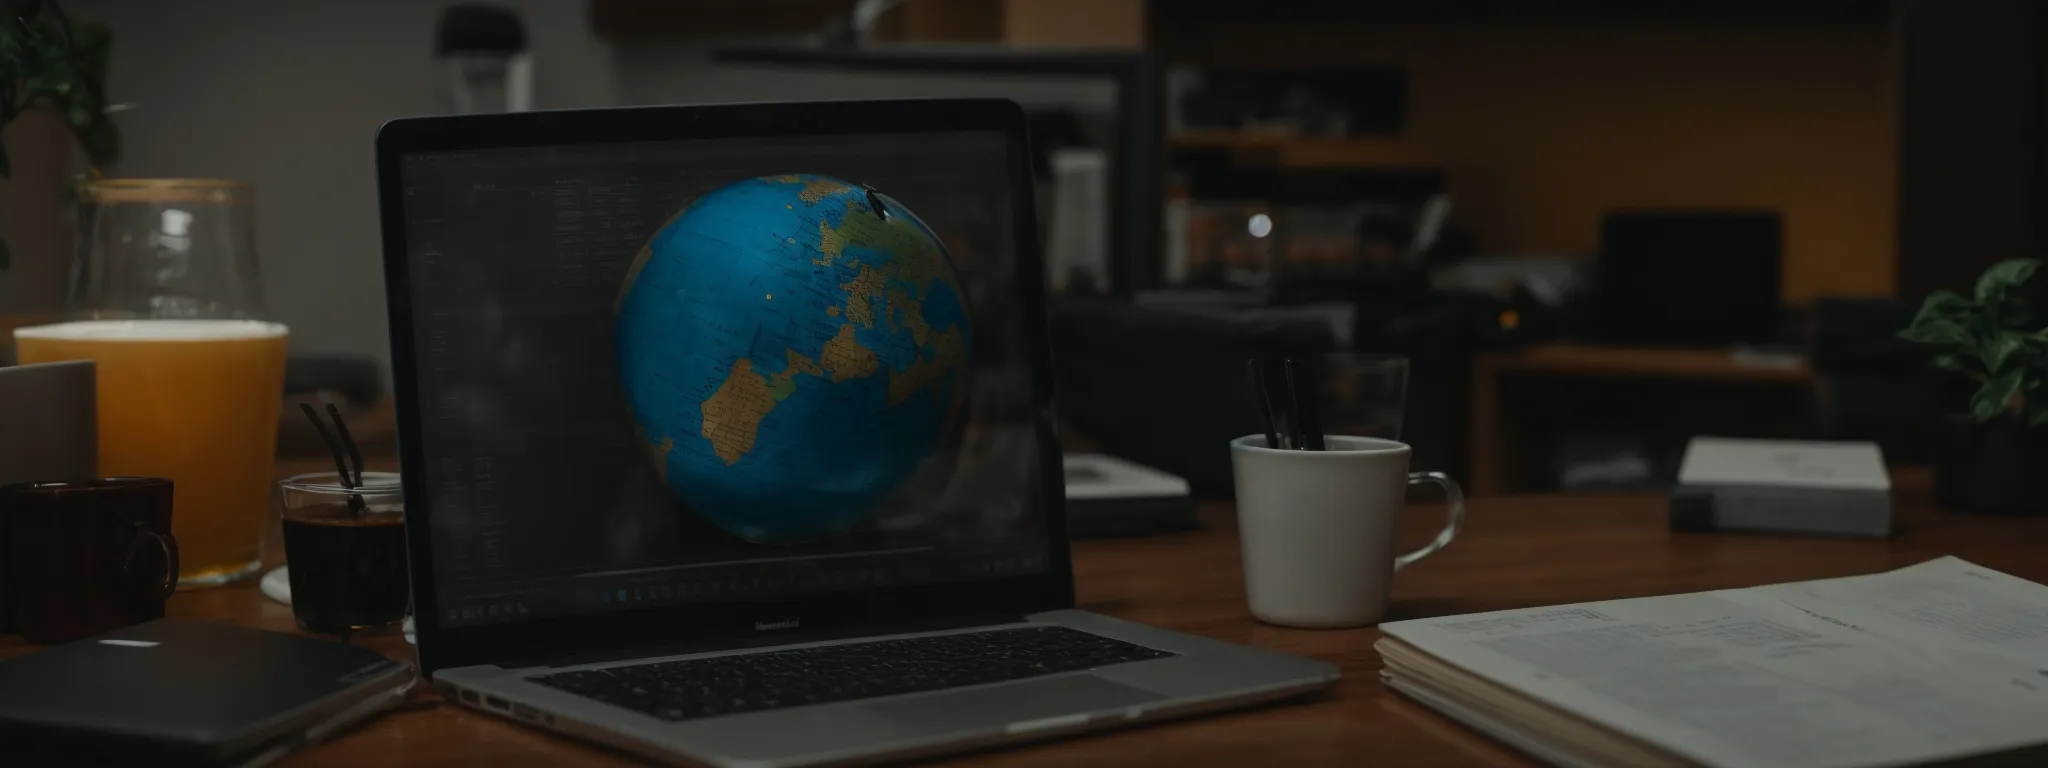 a globe centered on a desk with a laptop displaying charts and a pair of glasses resting beside it.